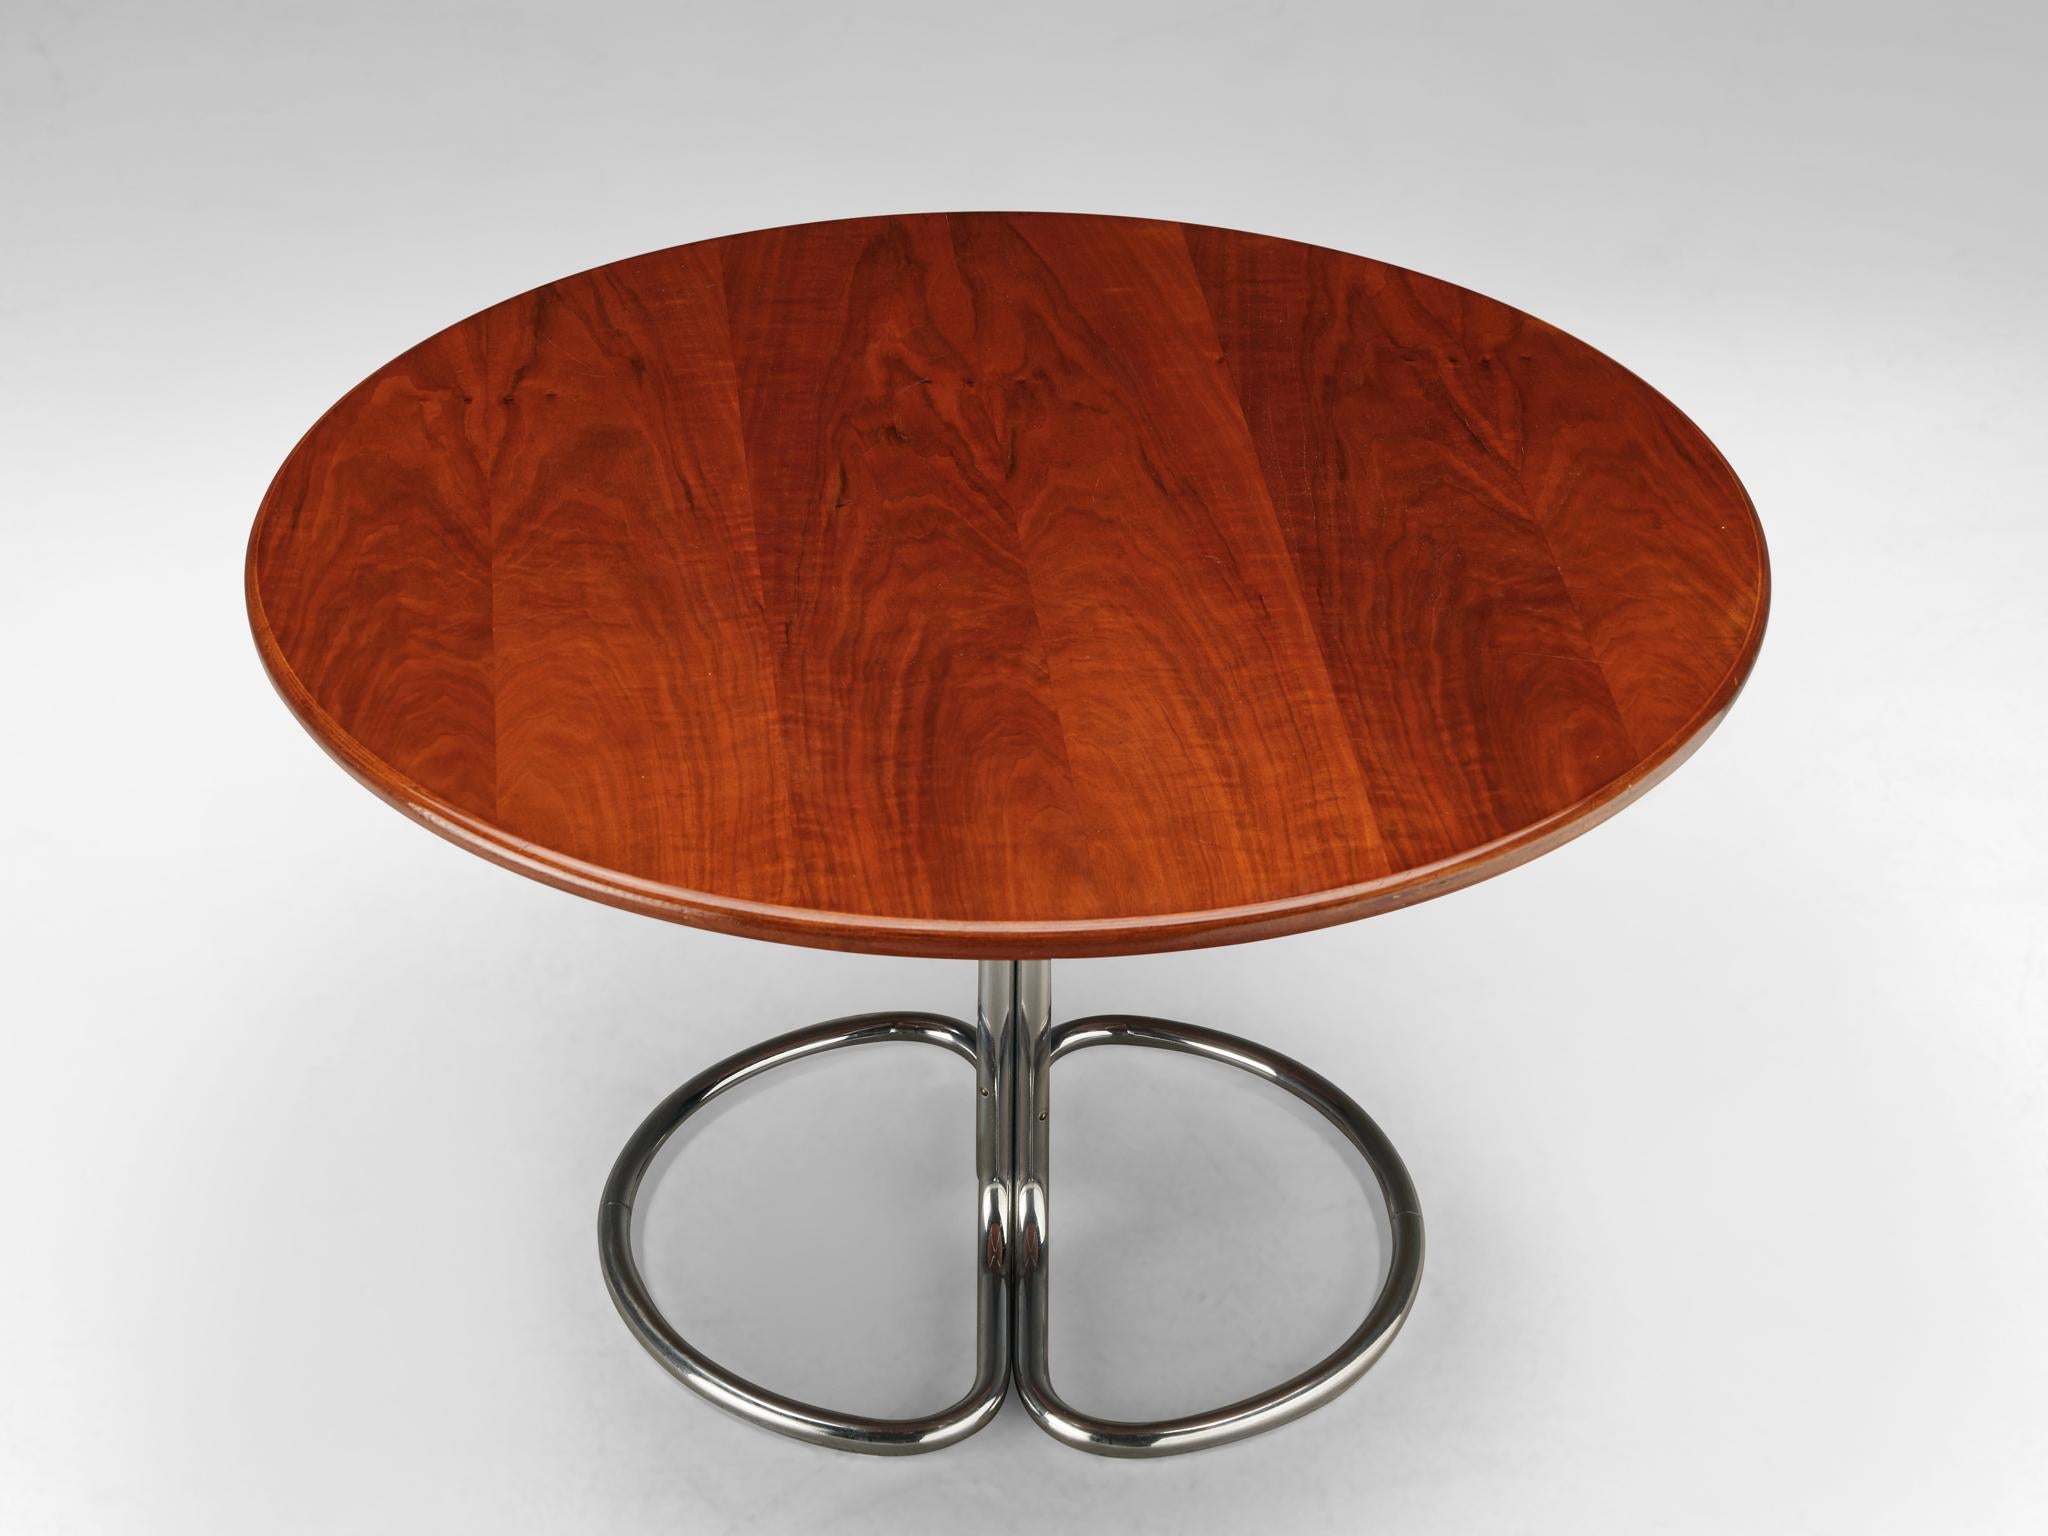 Giotto Stoppino for Bernini, 'Maia' dining table, walnut and chromed metal, Italy, 1960s

Round dining table by Giotto Stoppino. The walnut tabletop shows a warm, honey colored grain. The top is supported by a four-part chromed base that consists of